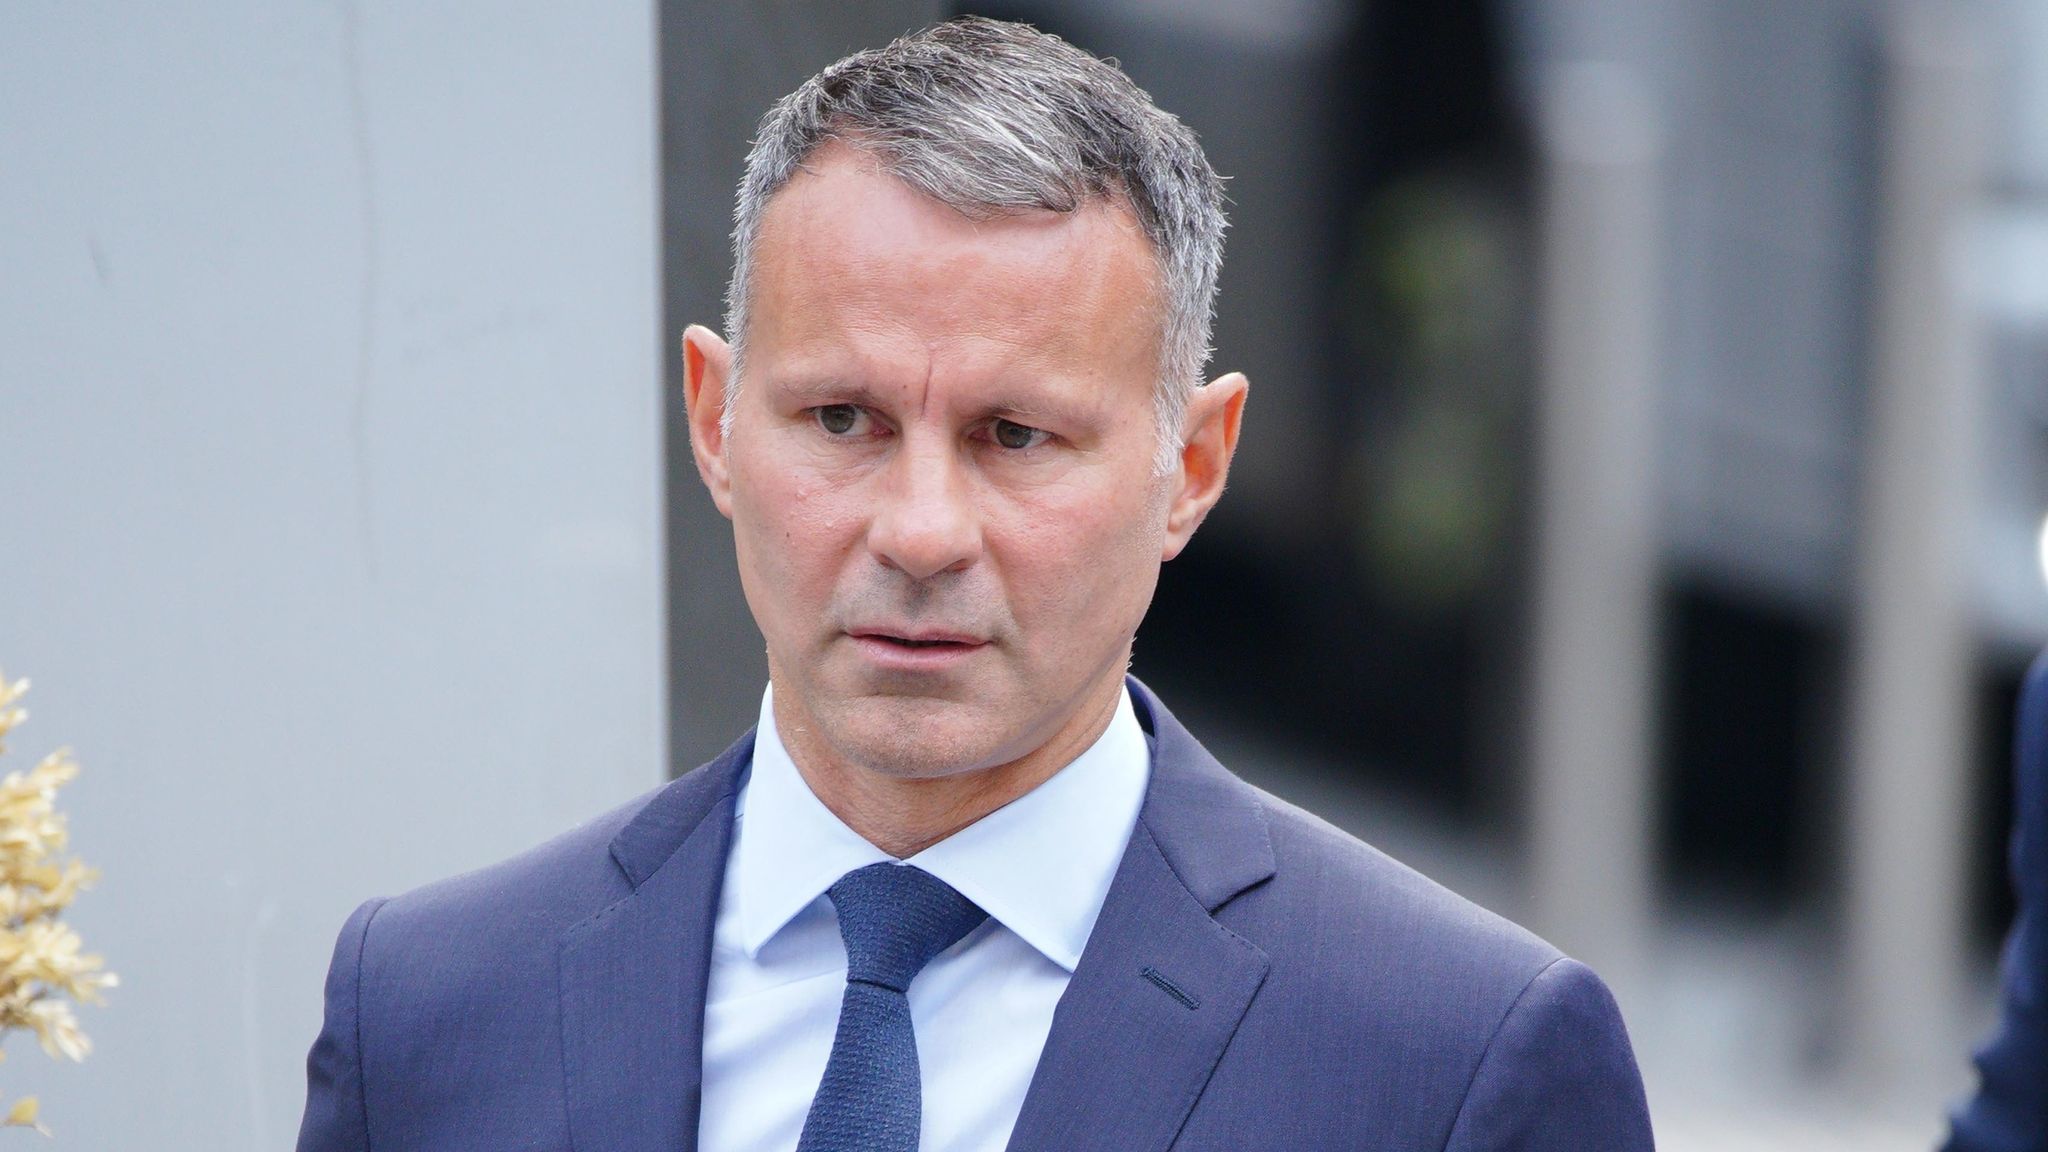 Ryan Giggs trial Ex-Manchester United star admits being love cheat who was never faithful in relationships pic